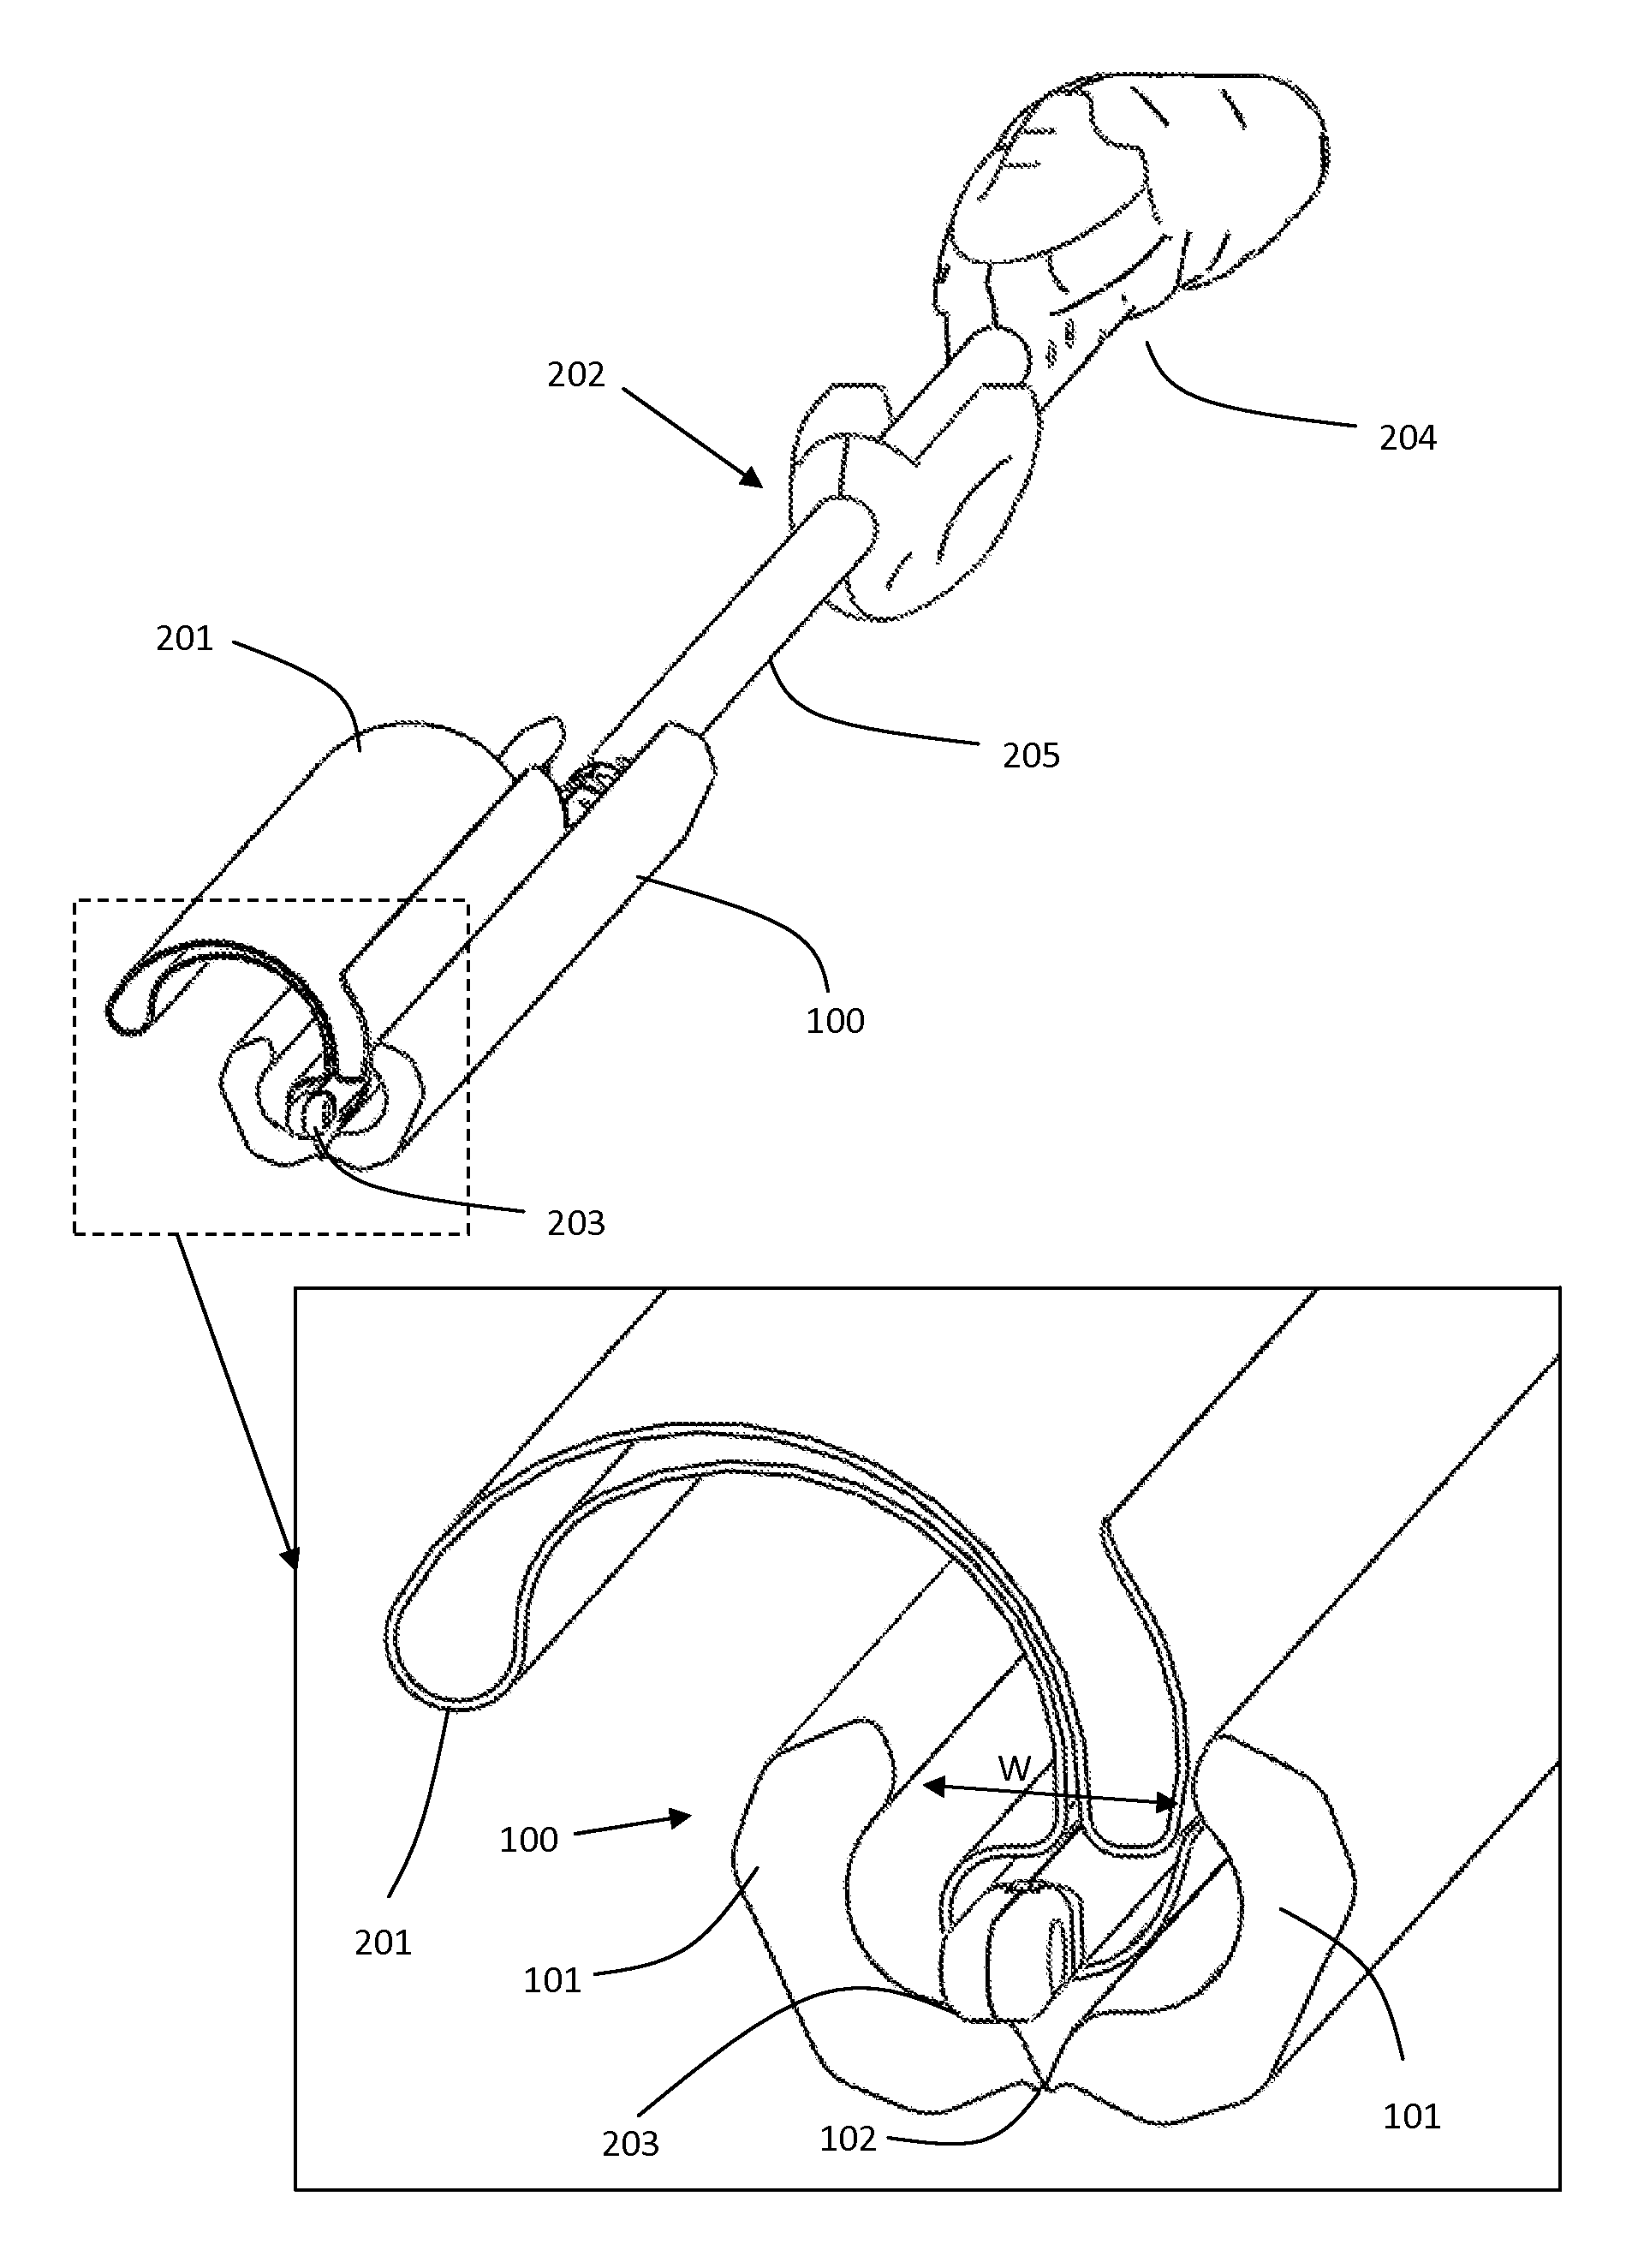 Device and method for rolling and inserting a prosthetic patch into a body cavity